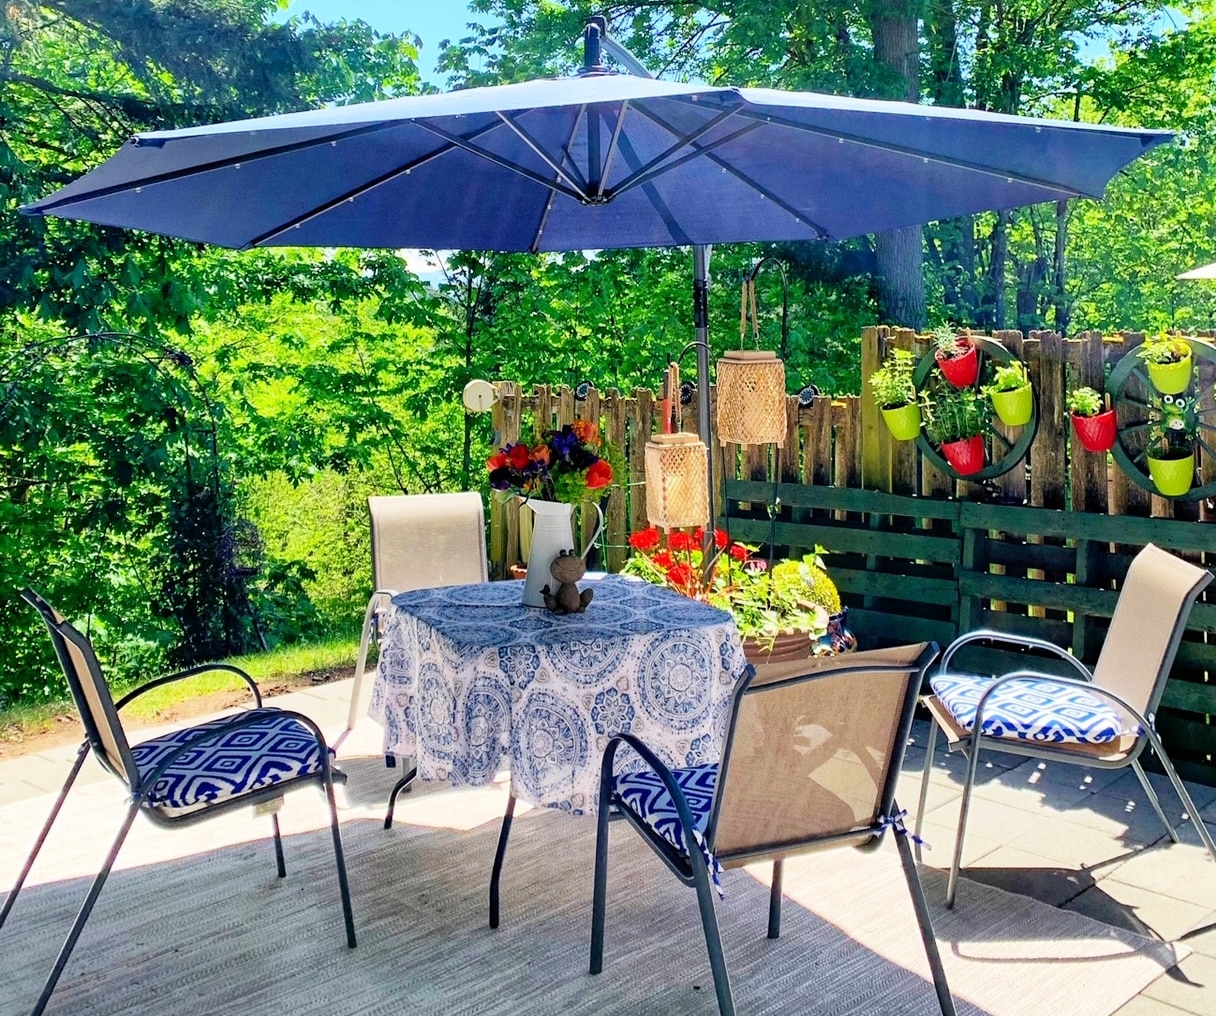 Patio Decorating Ideas on a Budget